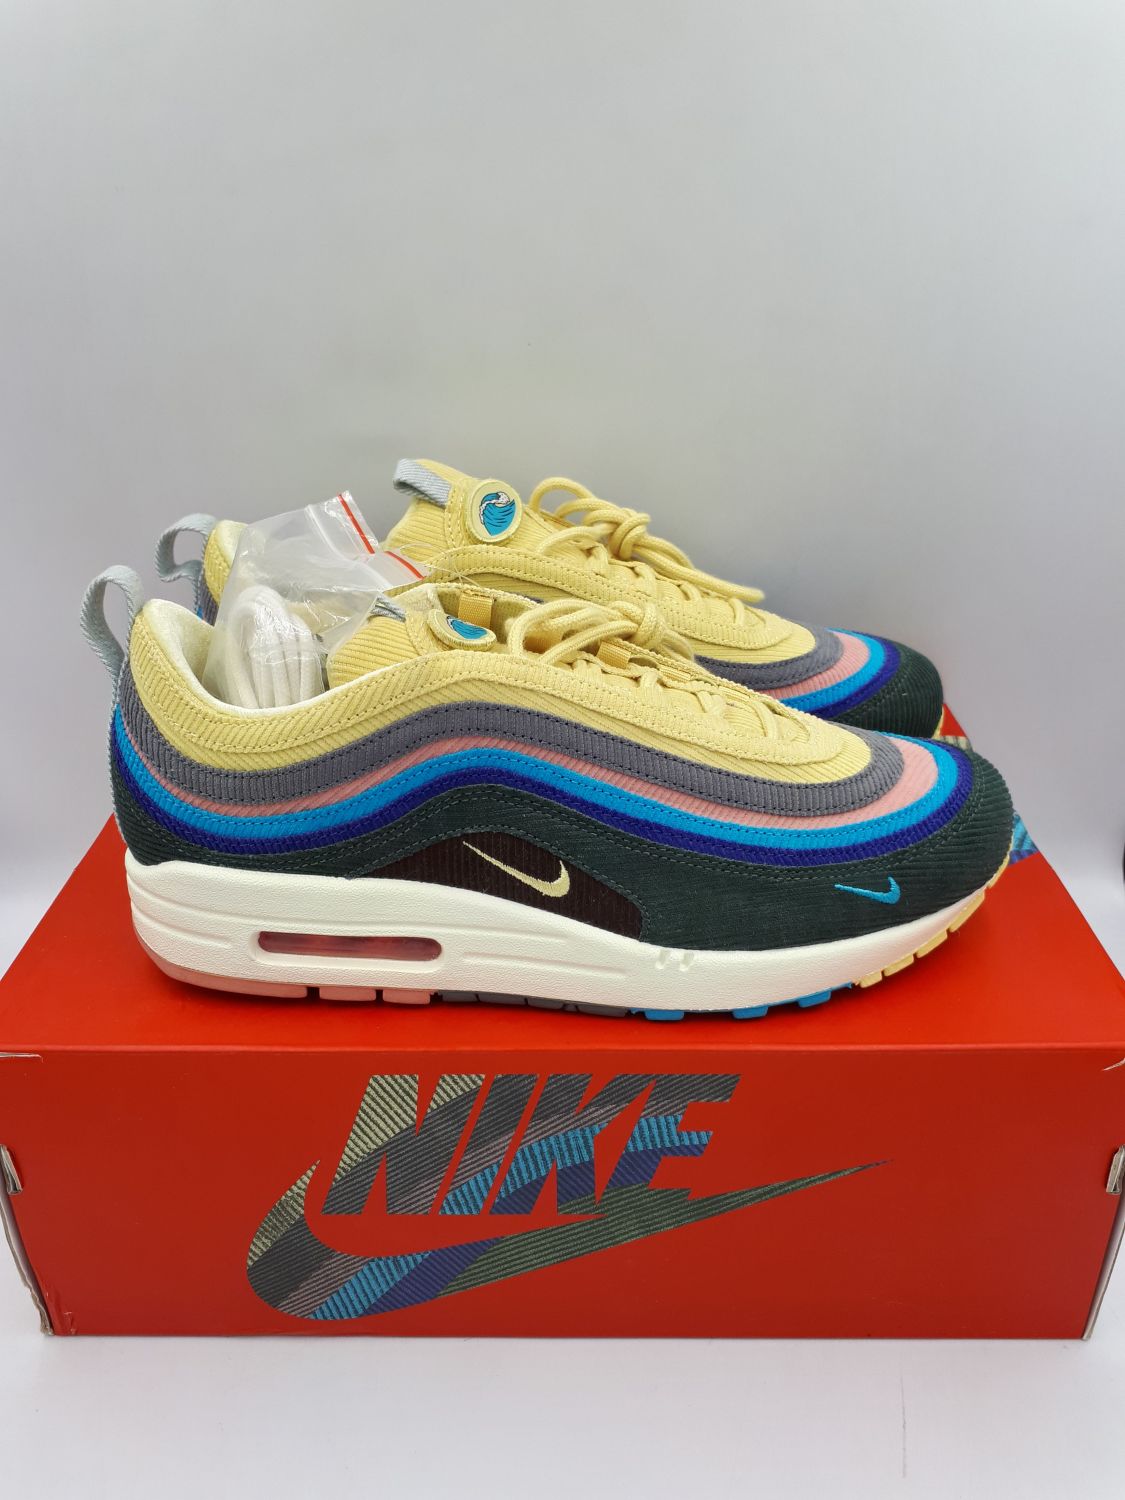 Nike Air Max 1/97 Sean Wotherspoon (Extra Lace Set Only) | AfterMarket